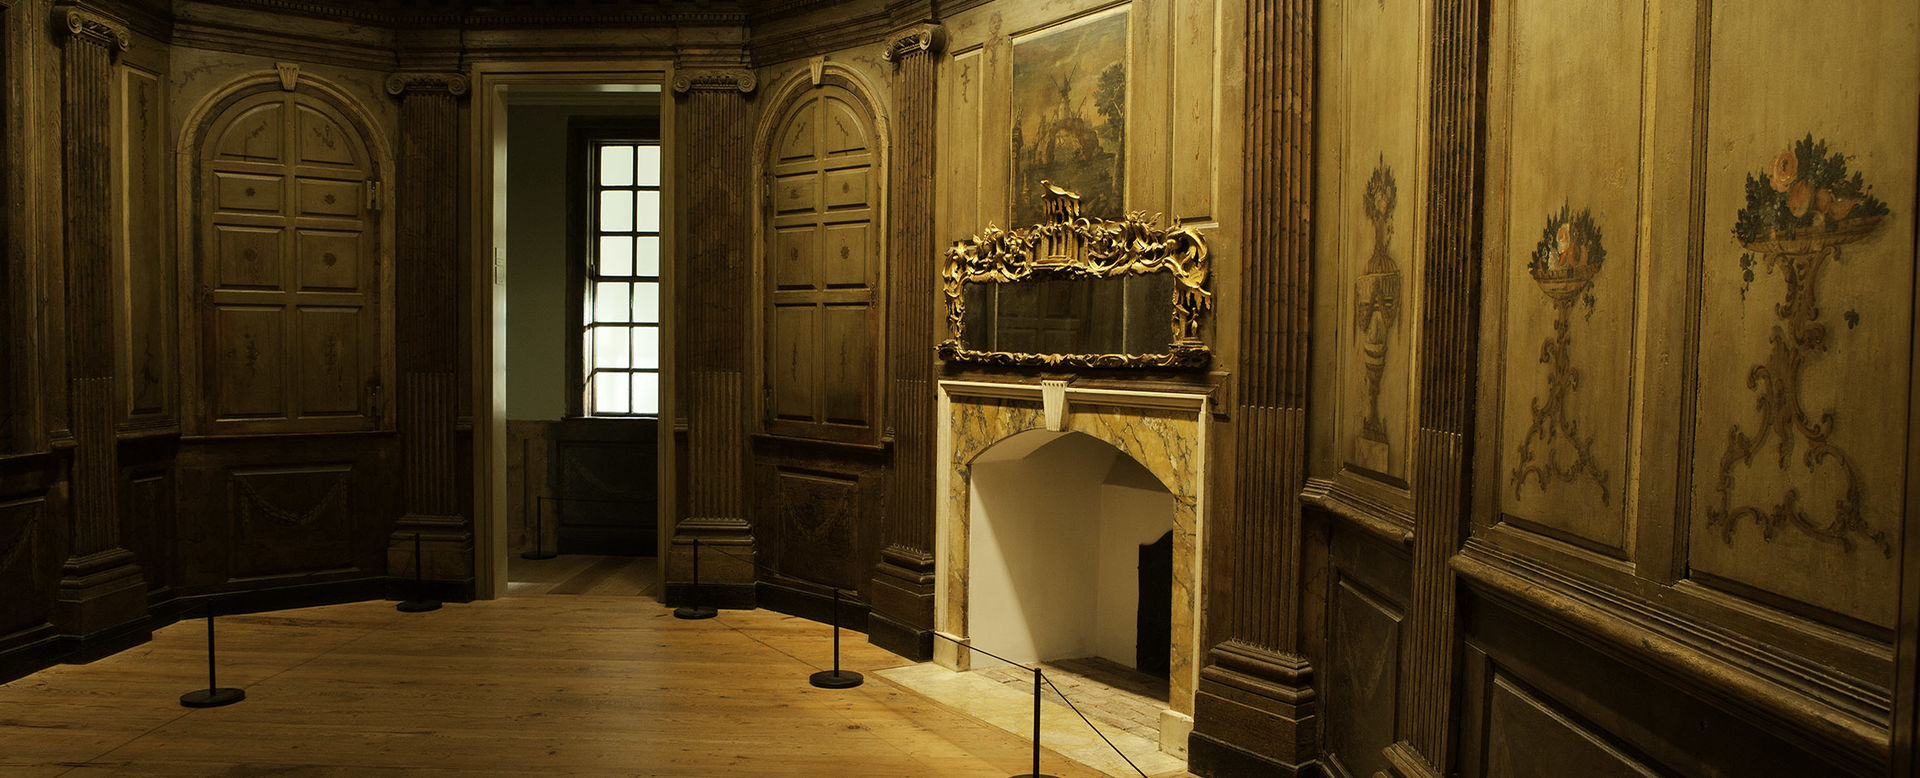 A cropped photograph of the Marmion room installed in the Met higlighting the fireplace, looking glass, and decorative wall panels.